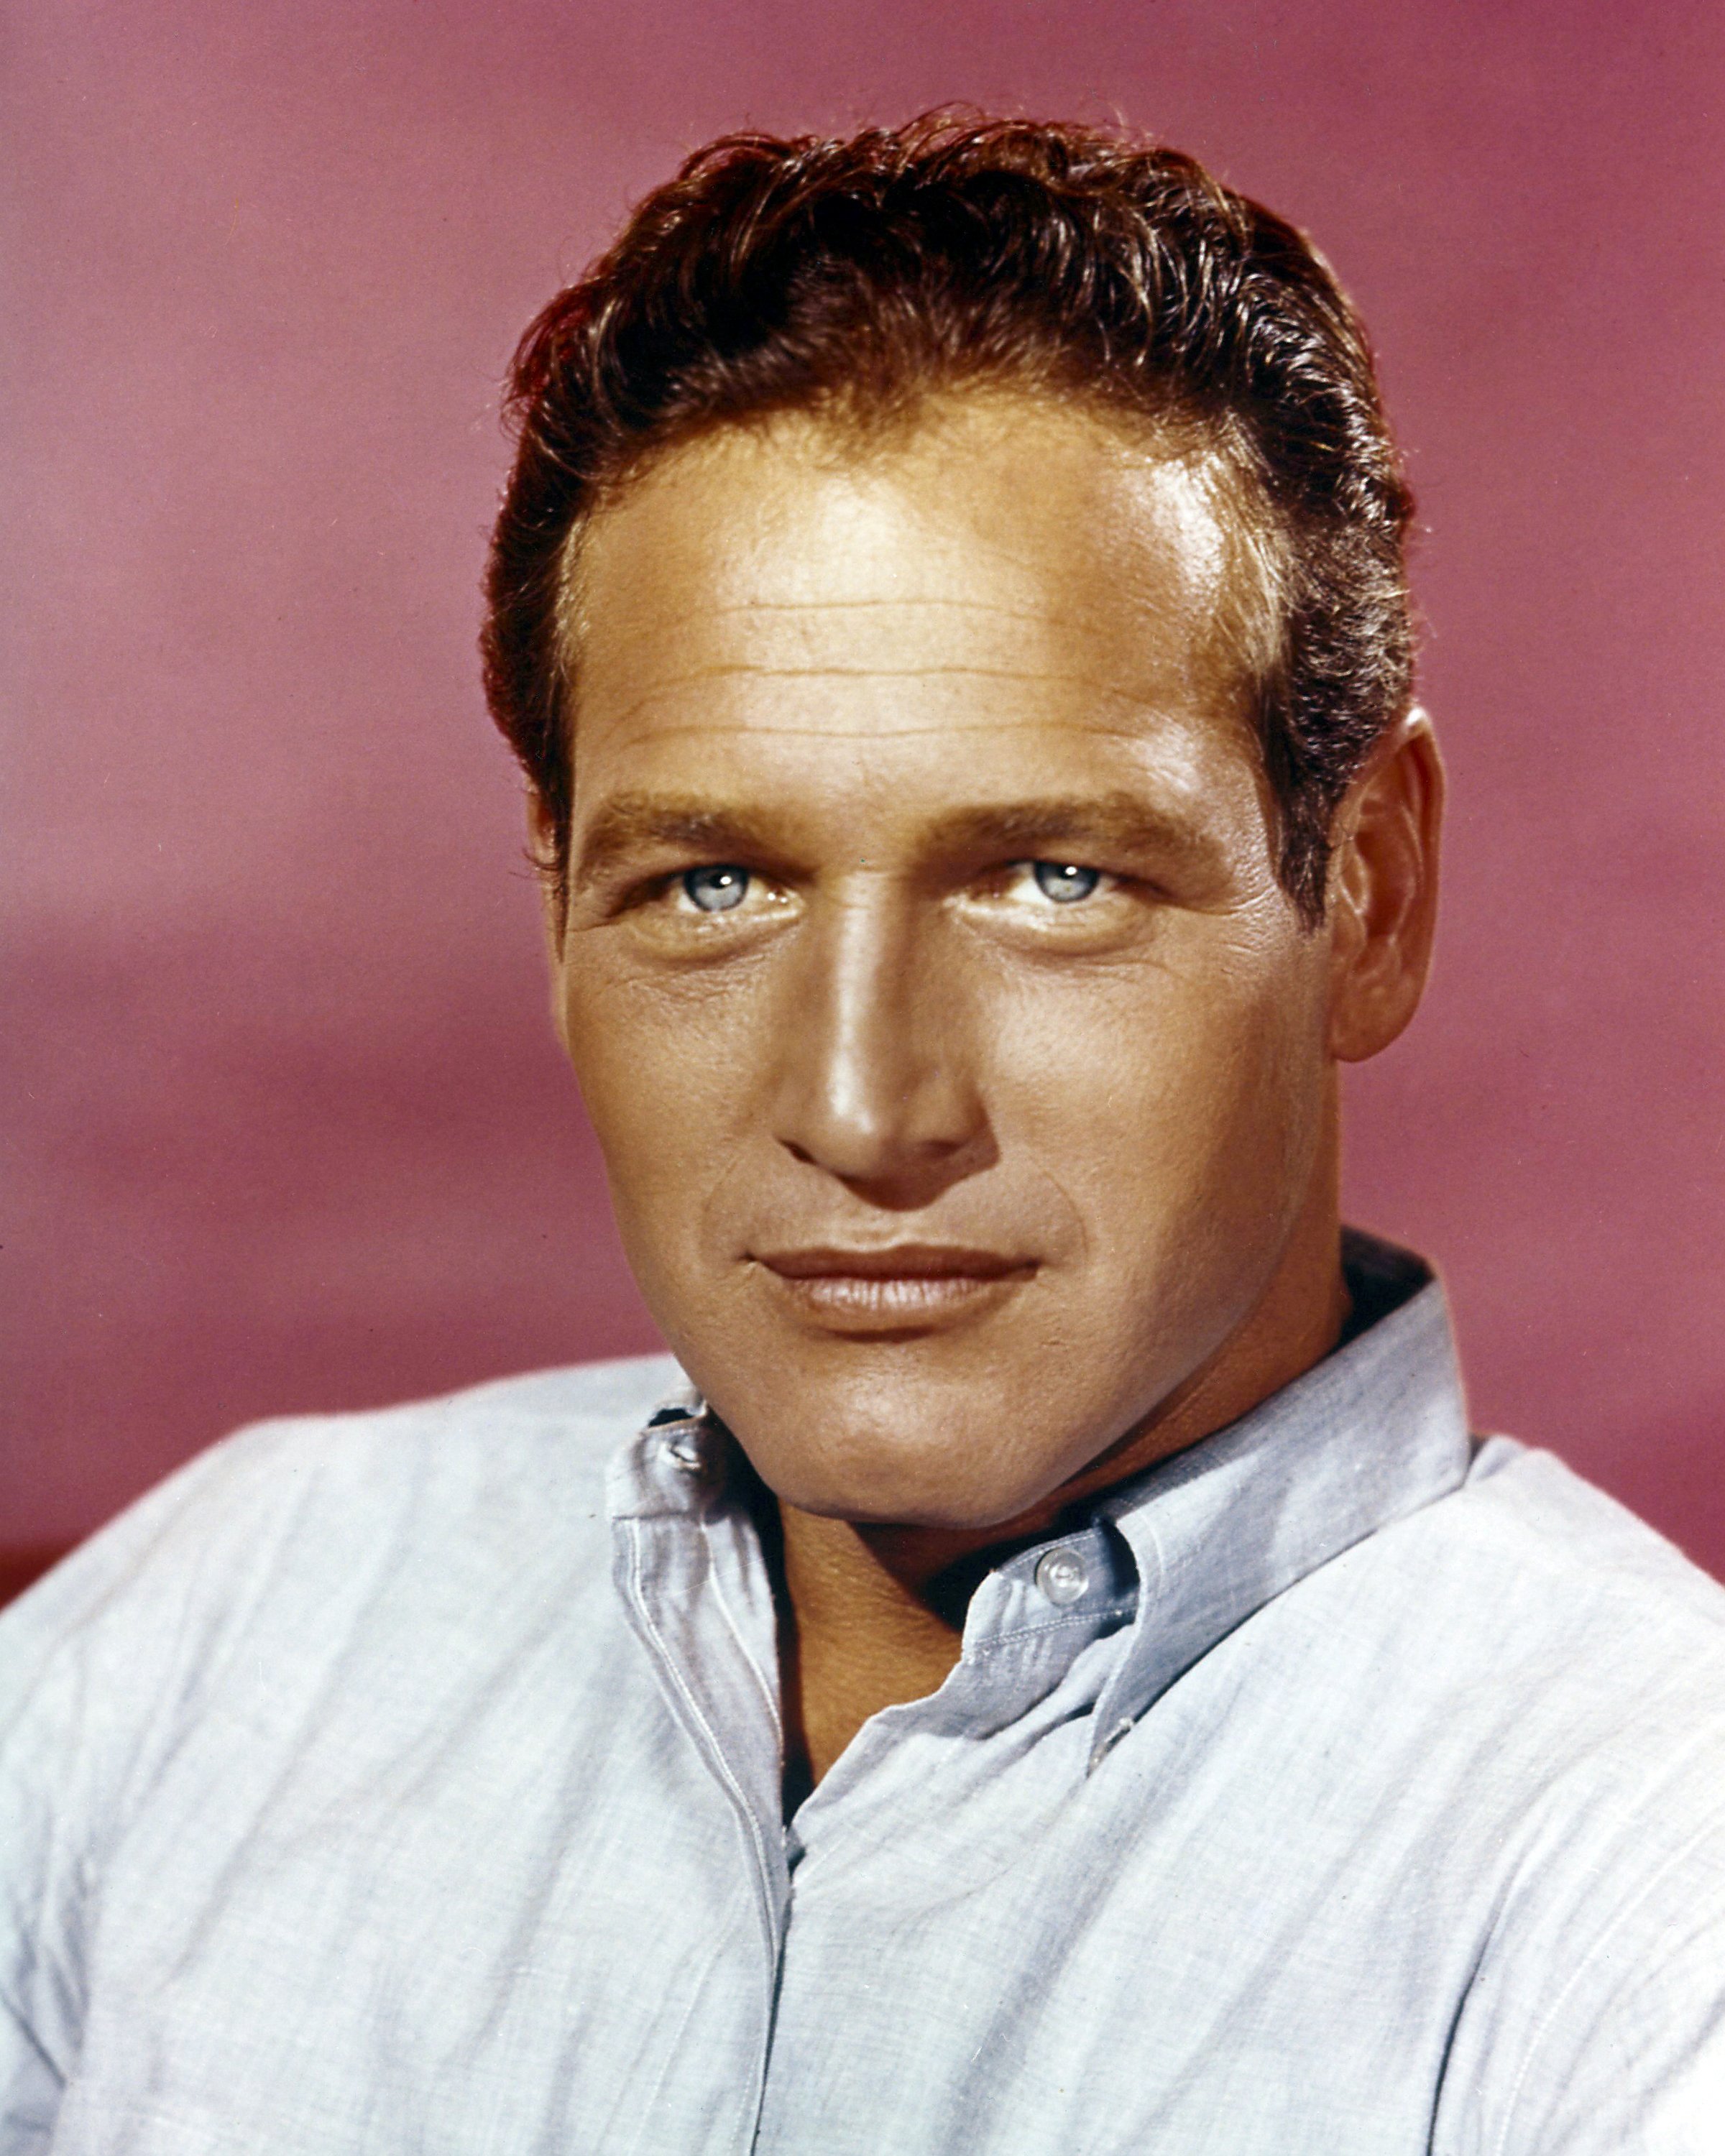 Portrait of Paul Newman from the 1960s. | Source: Getty Images